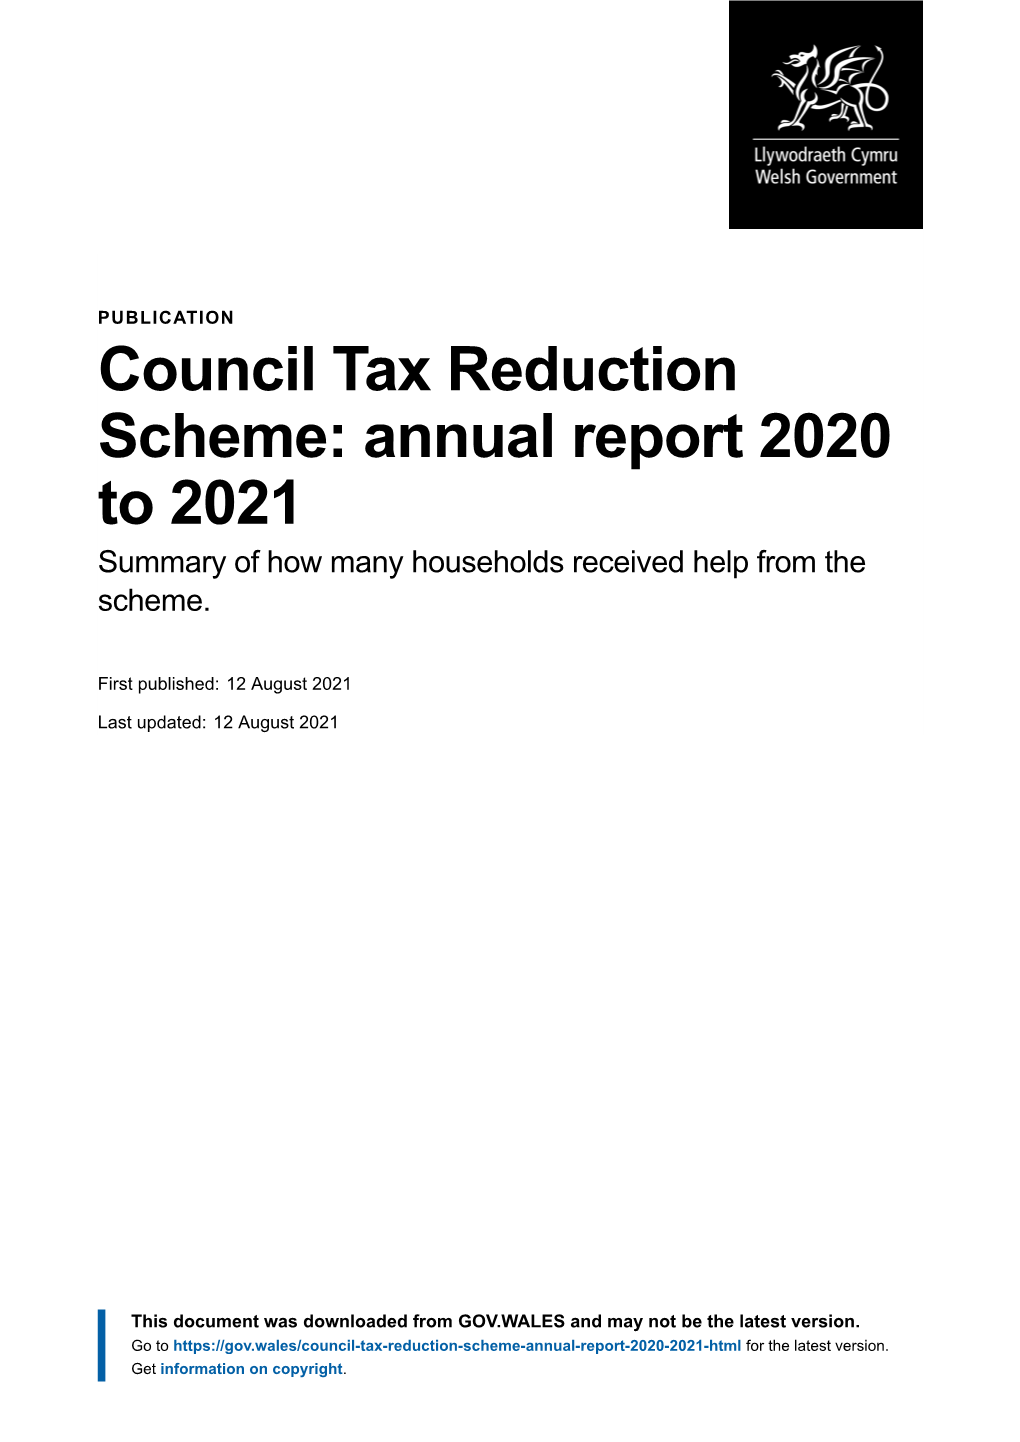 Council Tax Reduction Scheme: Annual Report 2020 to 2021 Summary of How Many Households Received Help from the Scheme